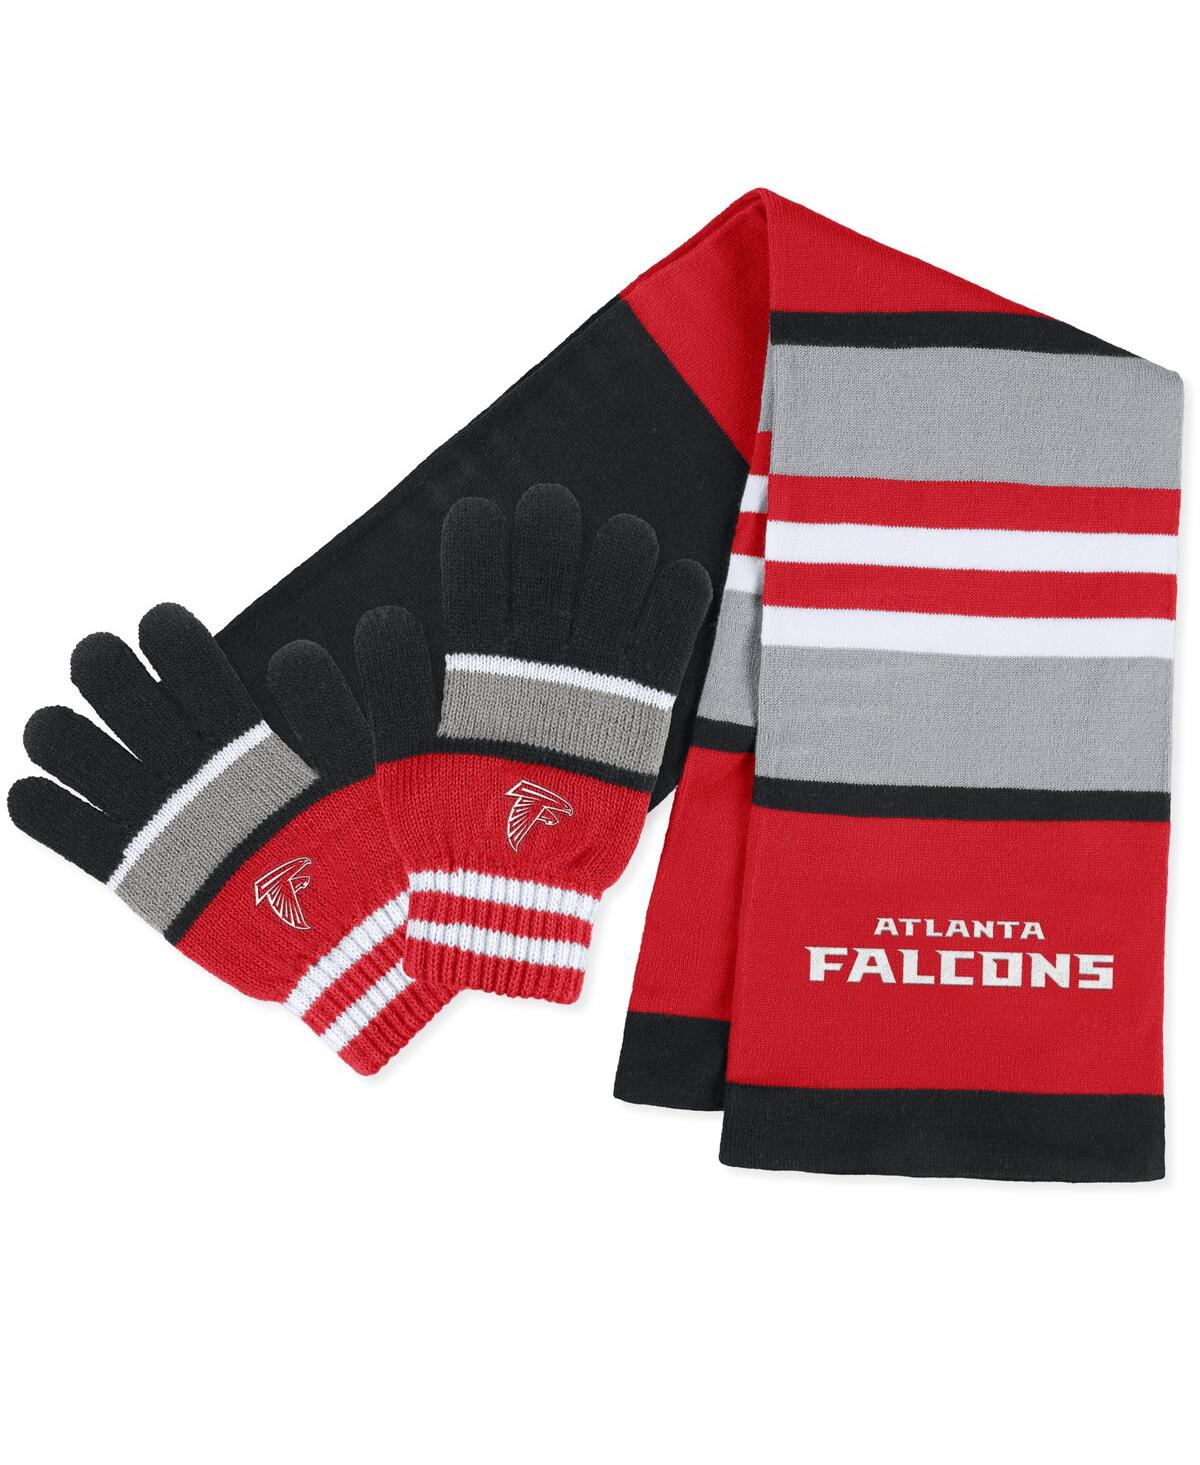 Women's Wear by Erin Andrews Atlanta Falcons Stripe Glove and Scarf Set - Red, Black